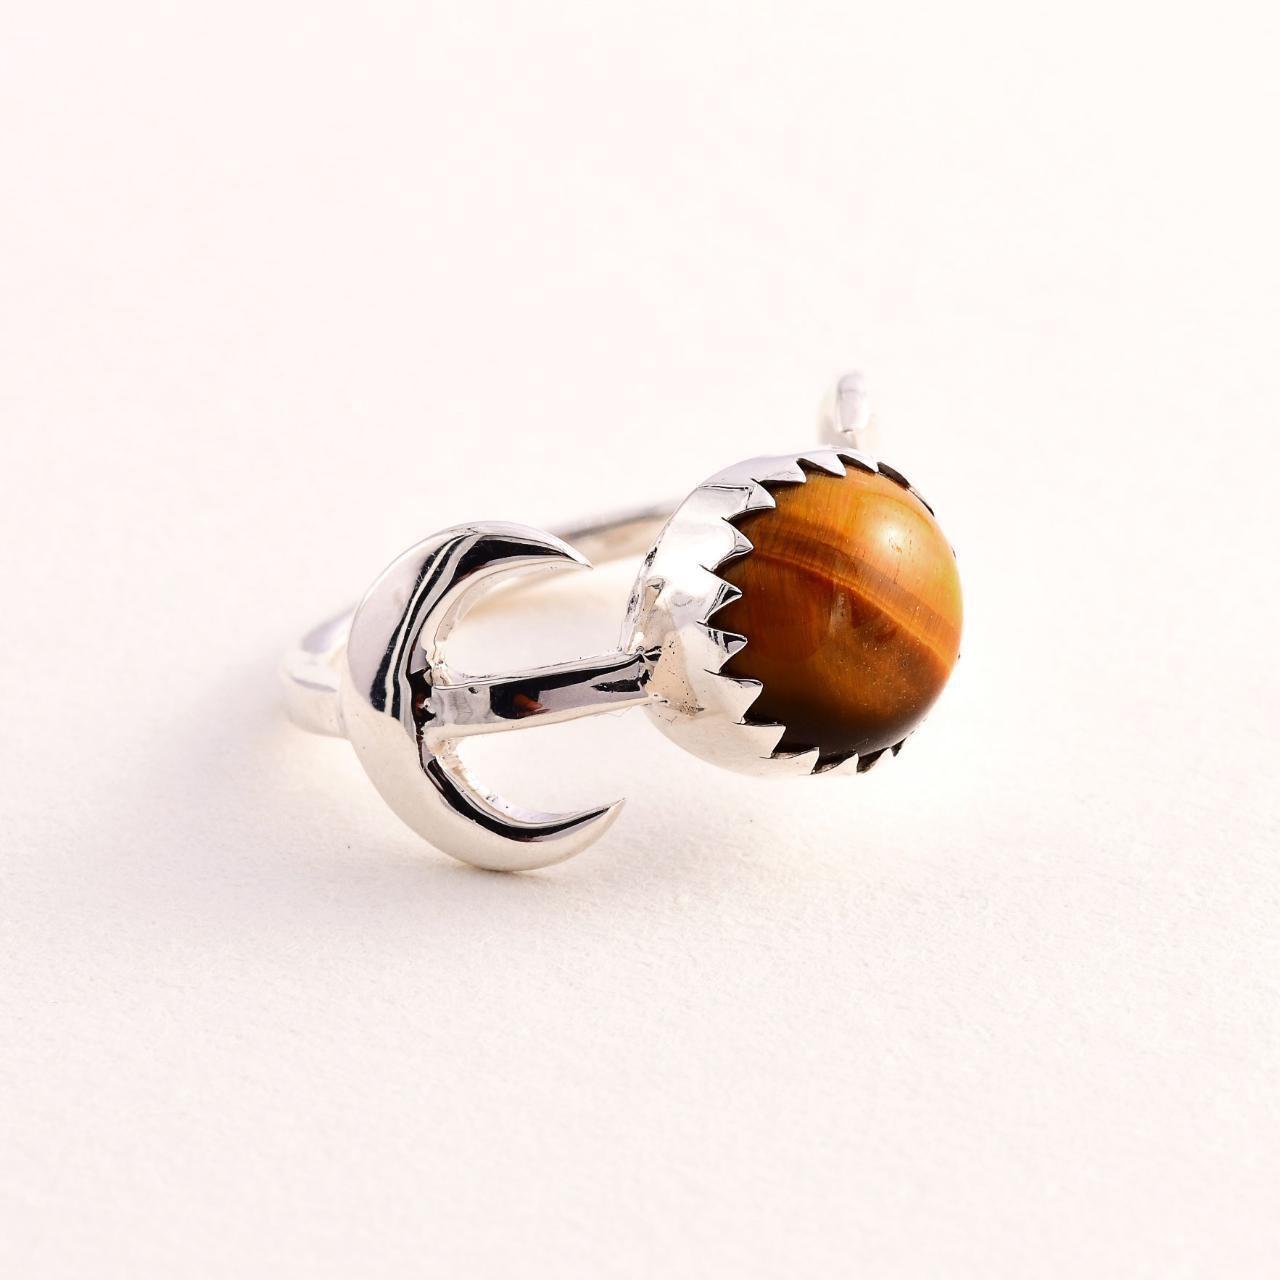 Product Image 1 - Sterling 925 Tigers Eye Ring

Size